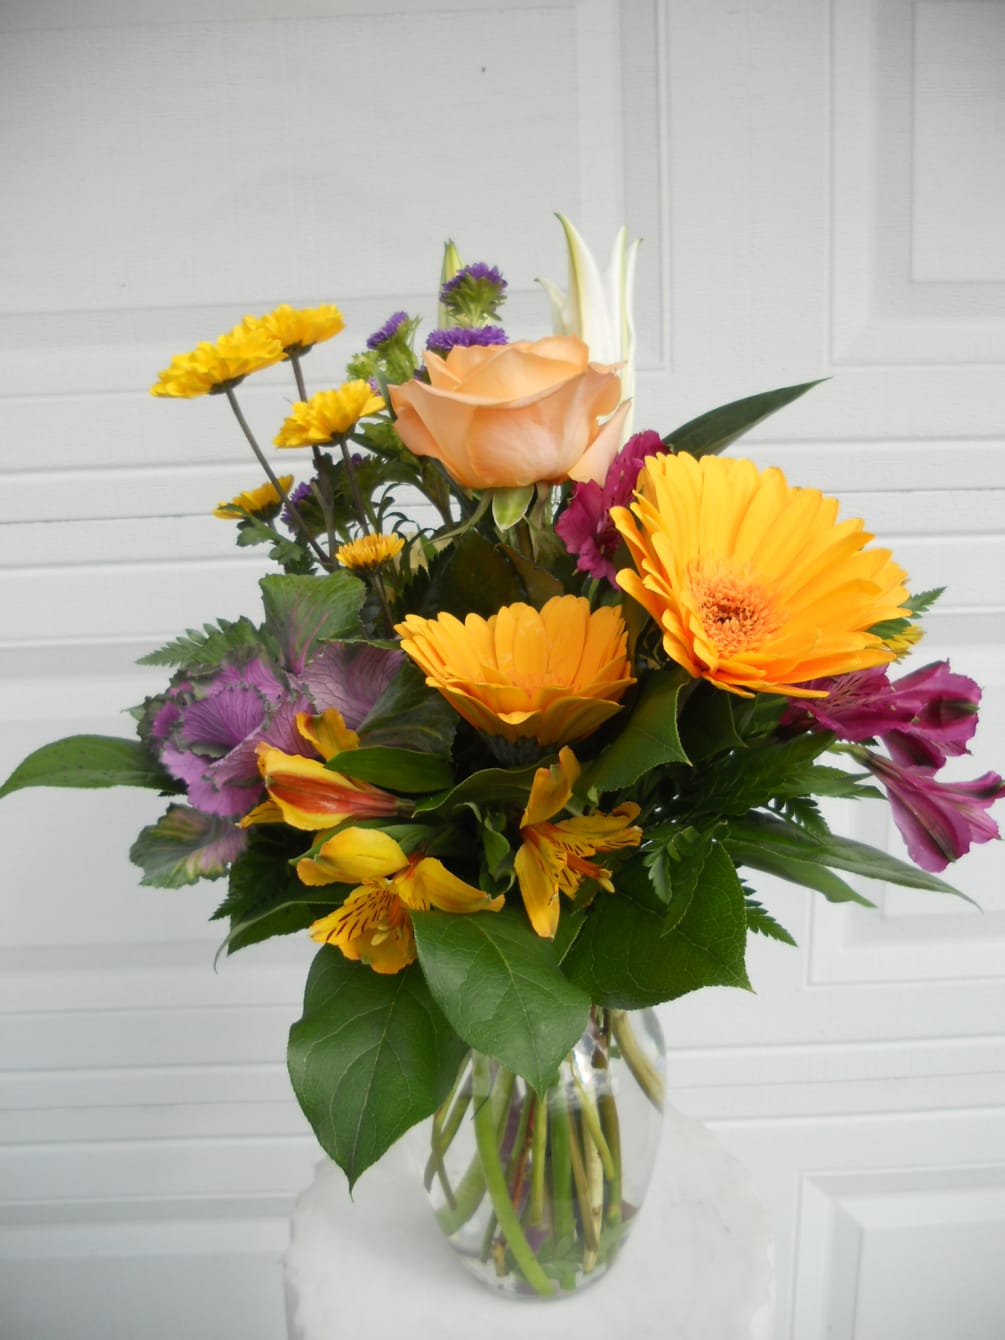 Mixture of seasonal autumn flowers in fall colors. Flowers can vary but